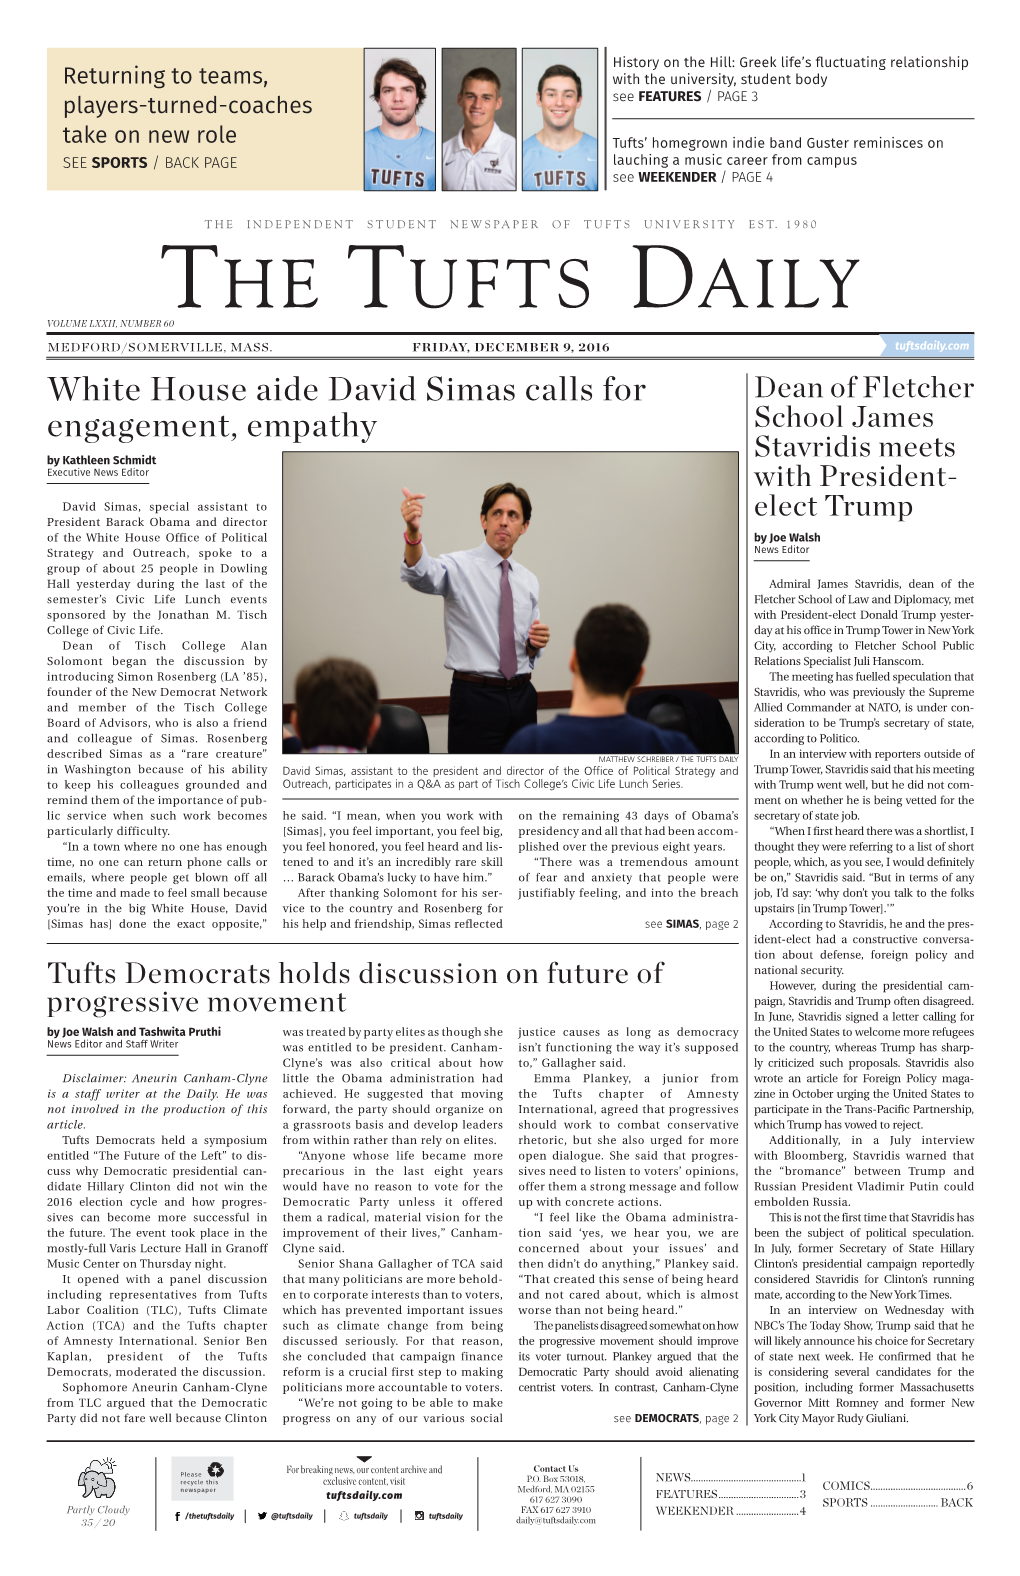 The Tufts Daily Volume Lxxii, Number 60